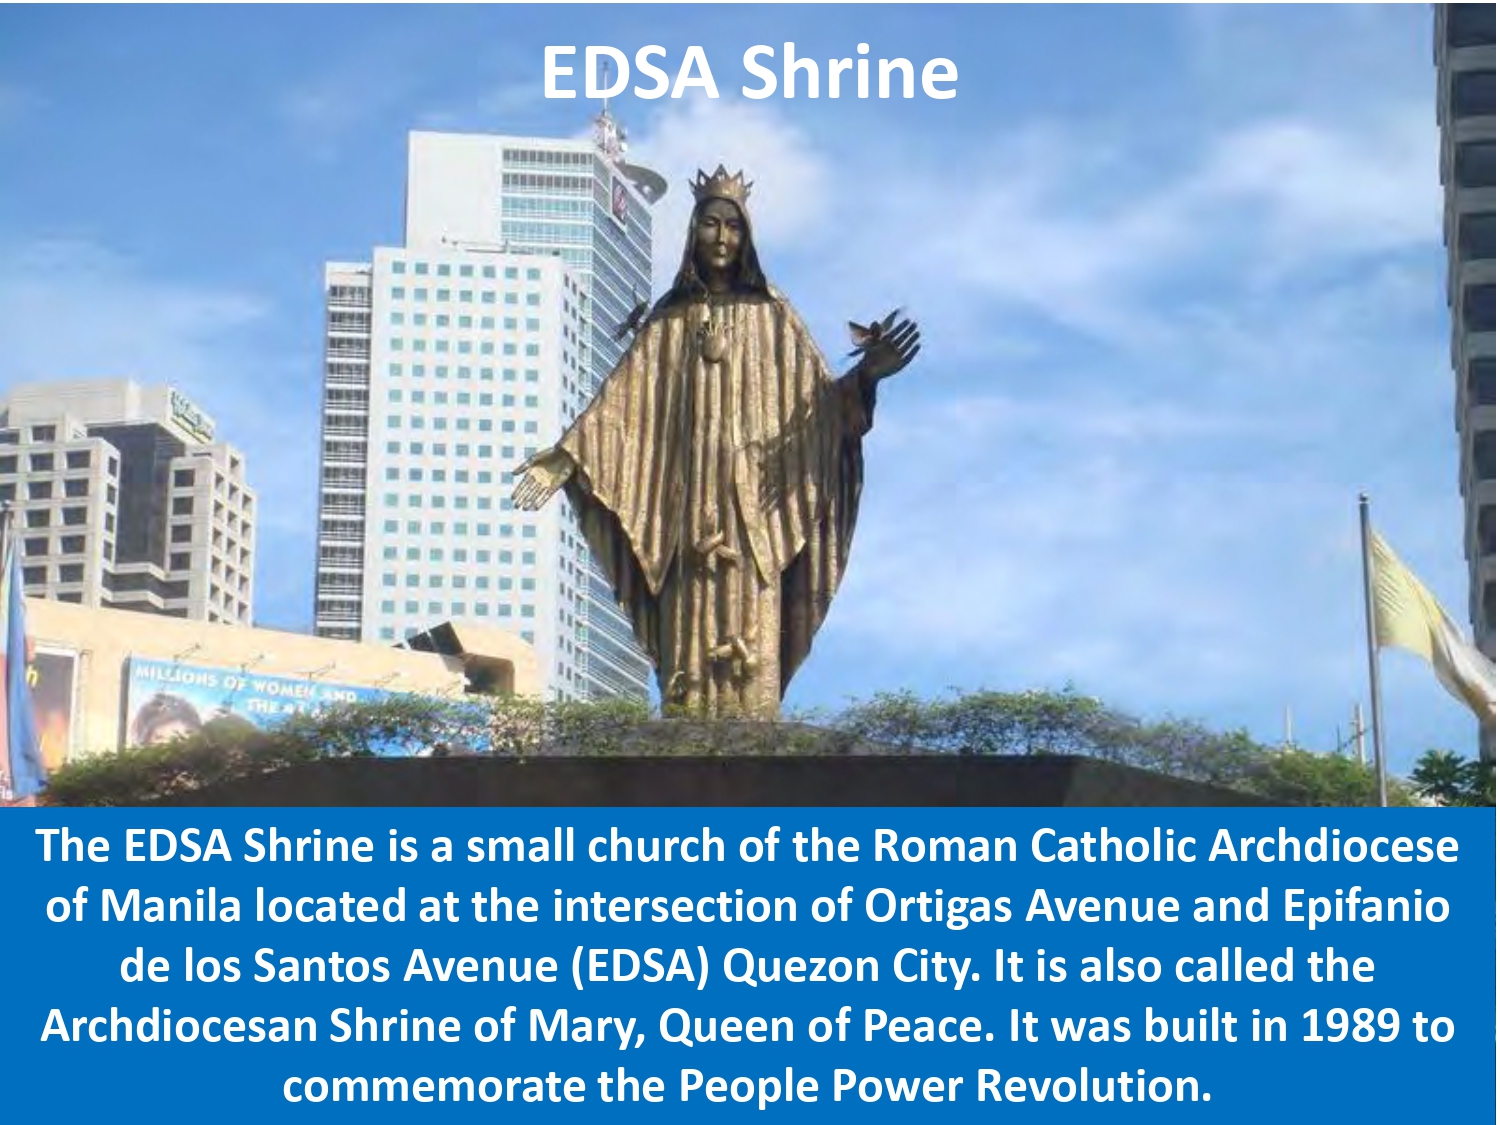 The EDSA Shrine is a small church of the Roman Catholic Archdiocese of Manila located at the intersection of Ortigas Avenue and Epifanio de los Santos Avenue (EDSA) Quezon City. It is also called the Archdiocesan Shrine of Mary, Queen of Peace. It was built in 1989 to commemorate the People Power Revolution.